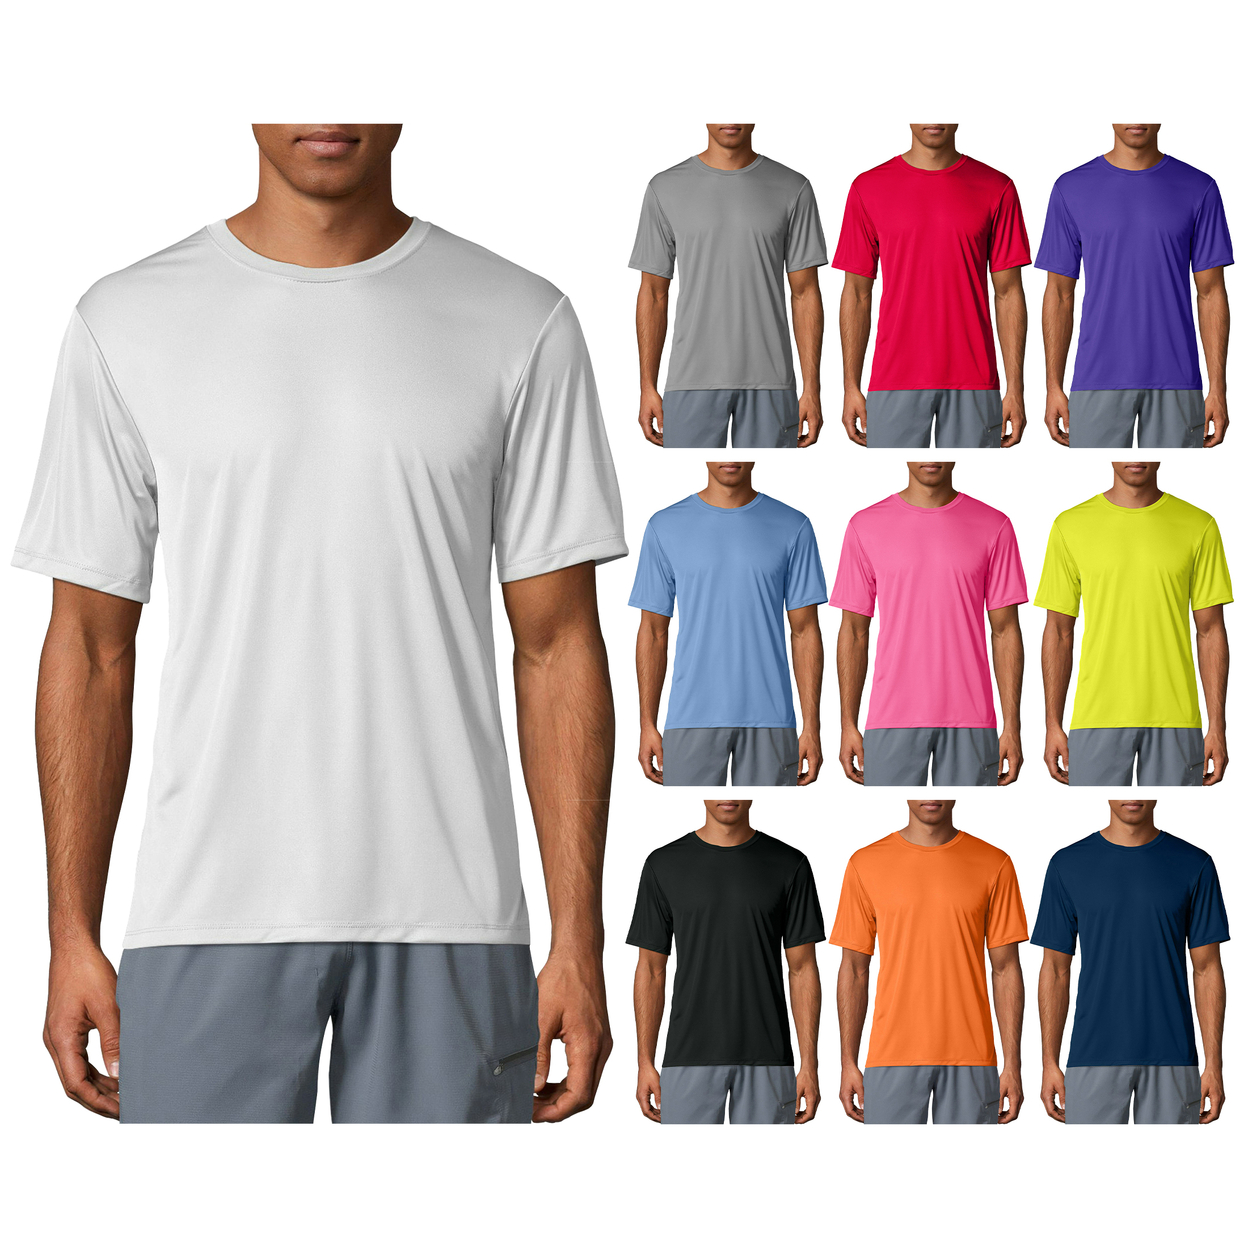 3-Pack: Men's Moisture Wicking Cool Dri-Fit Performance Short Sleeve Crew Neck T-Shirts - Large